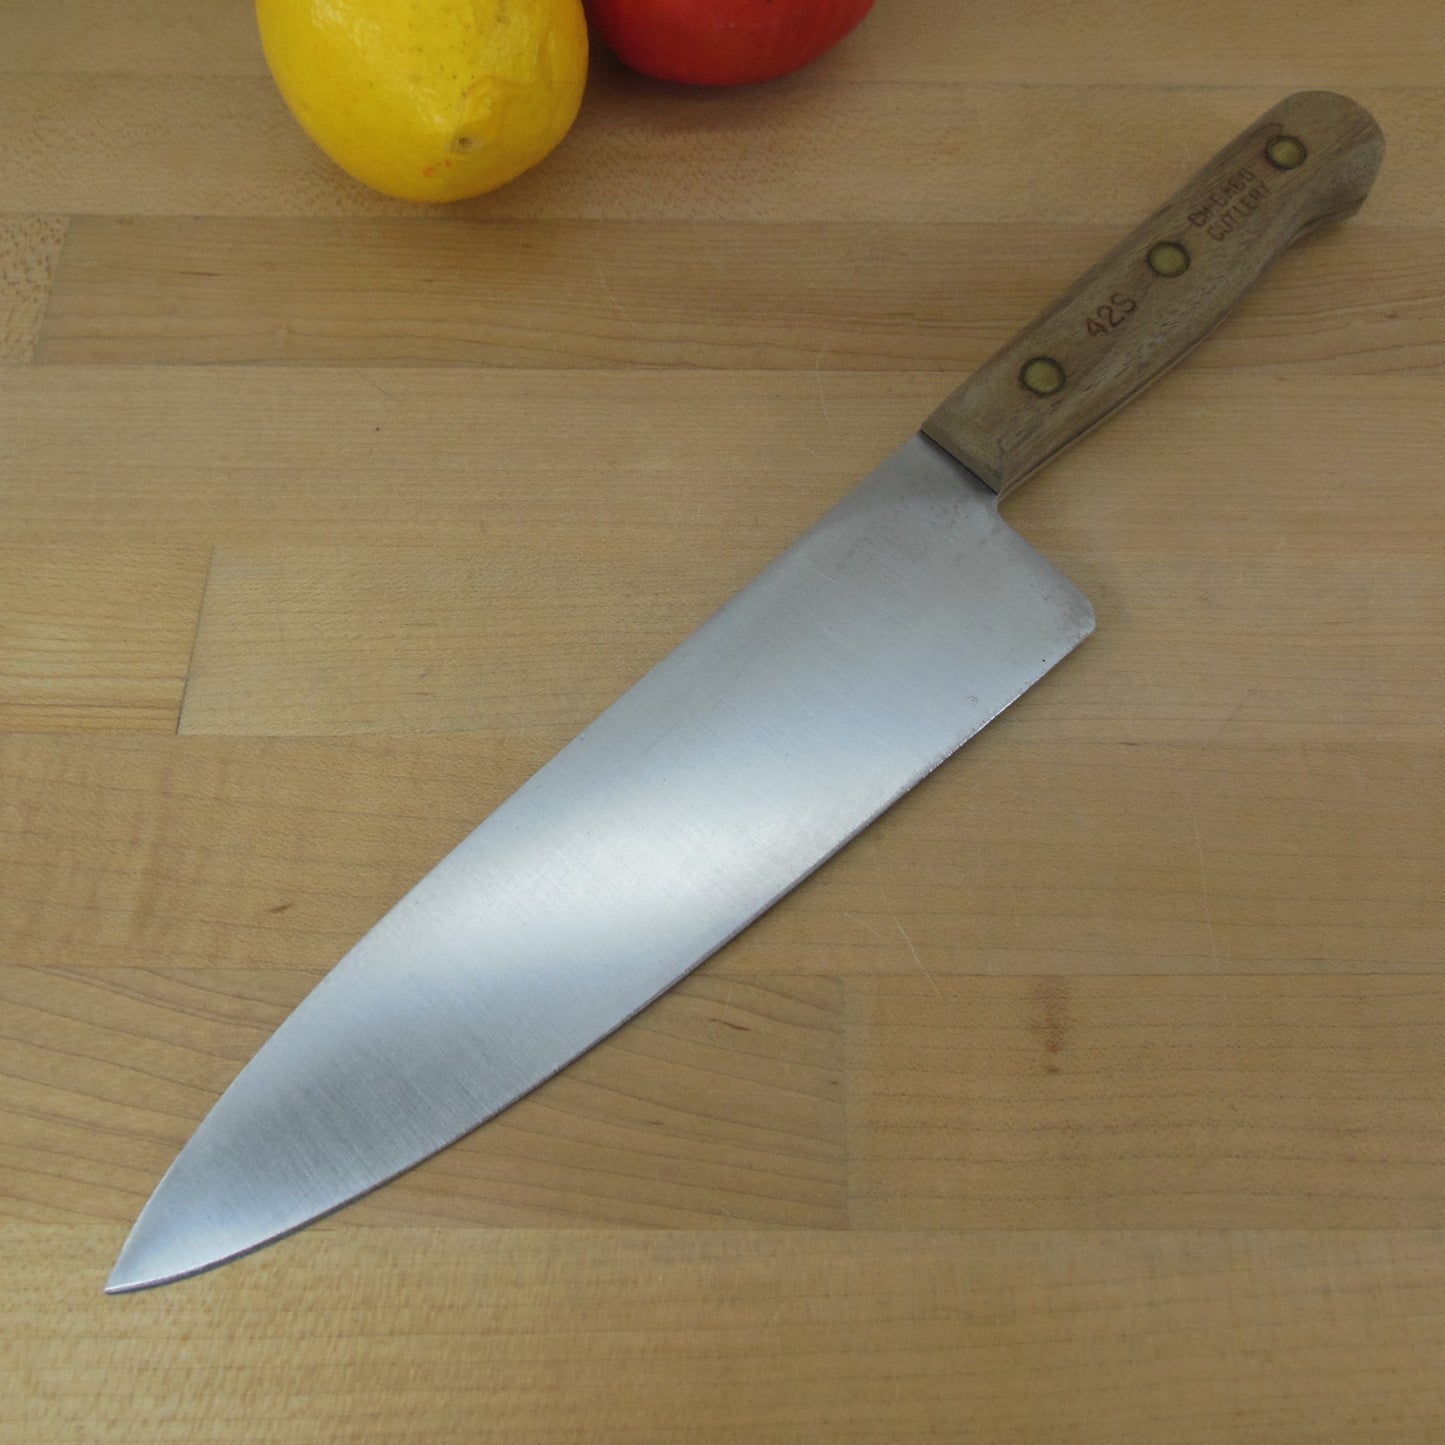 Chicago Cutlery USA 42S Chef 8" Knife - Walnut Handle Stainless Steel